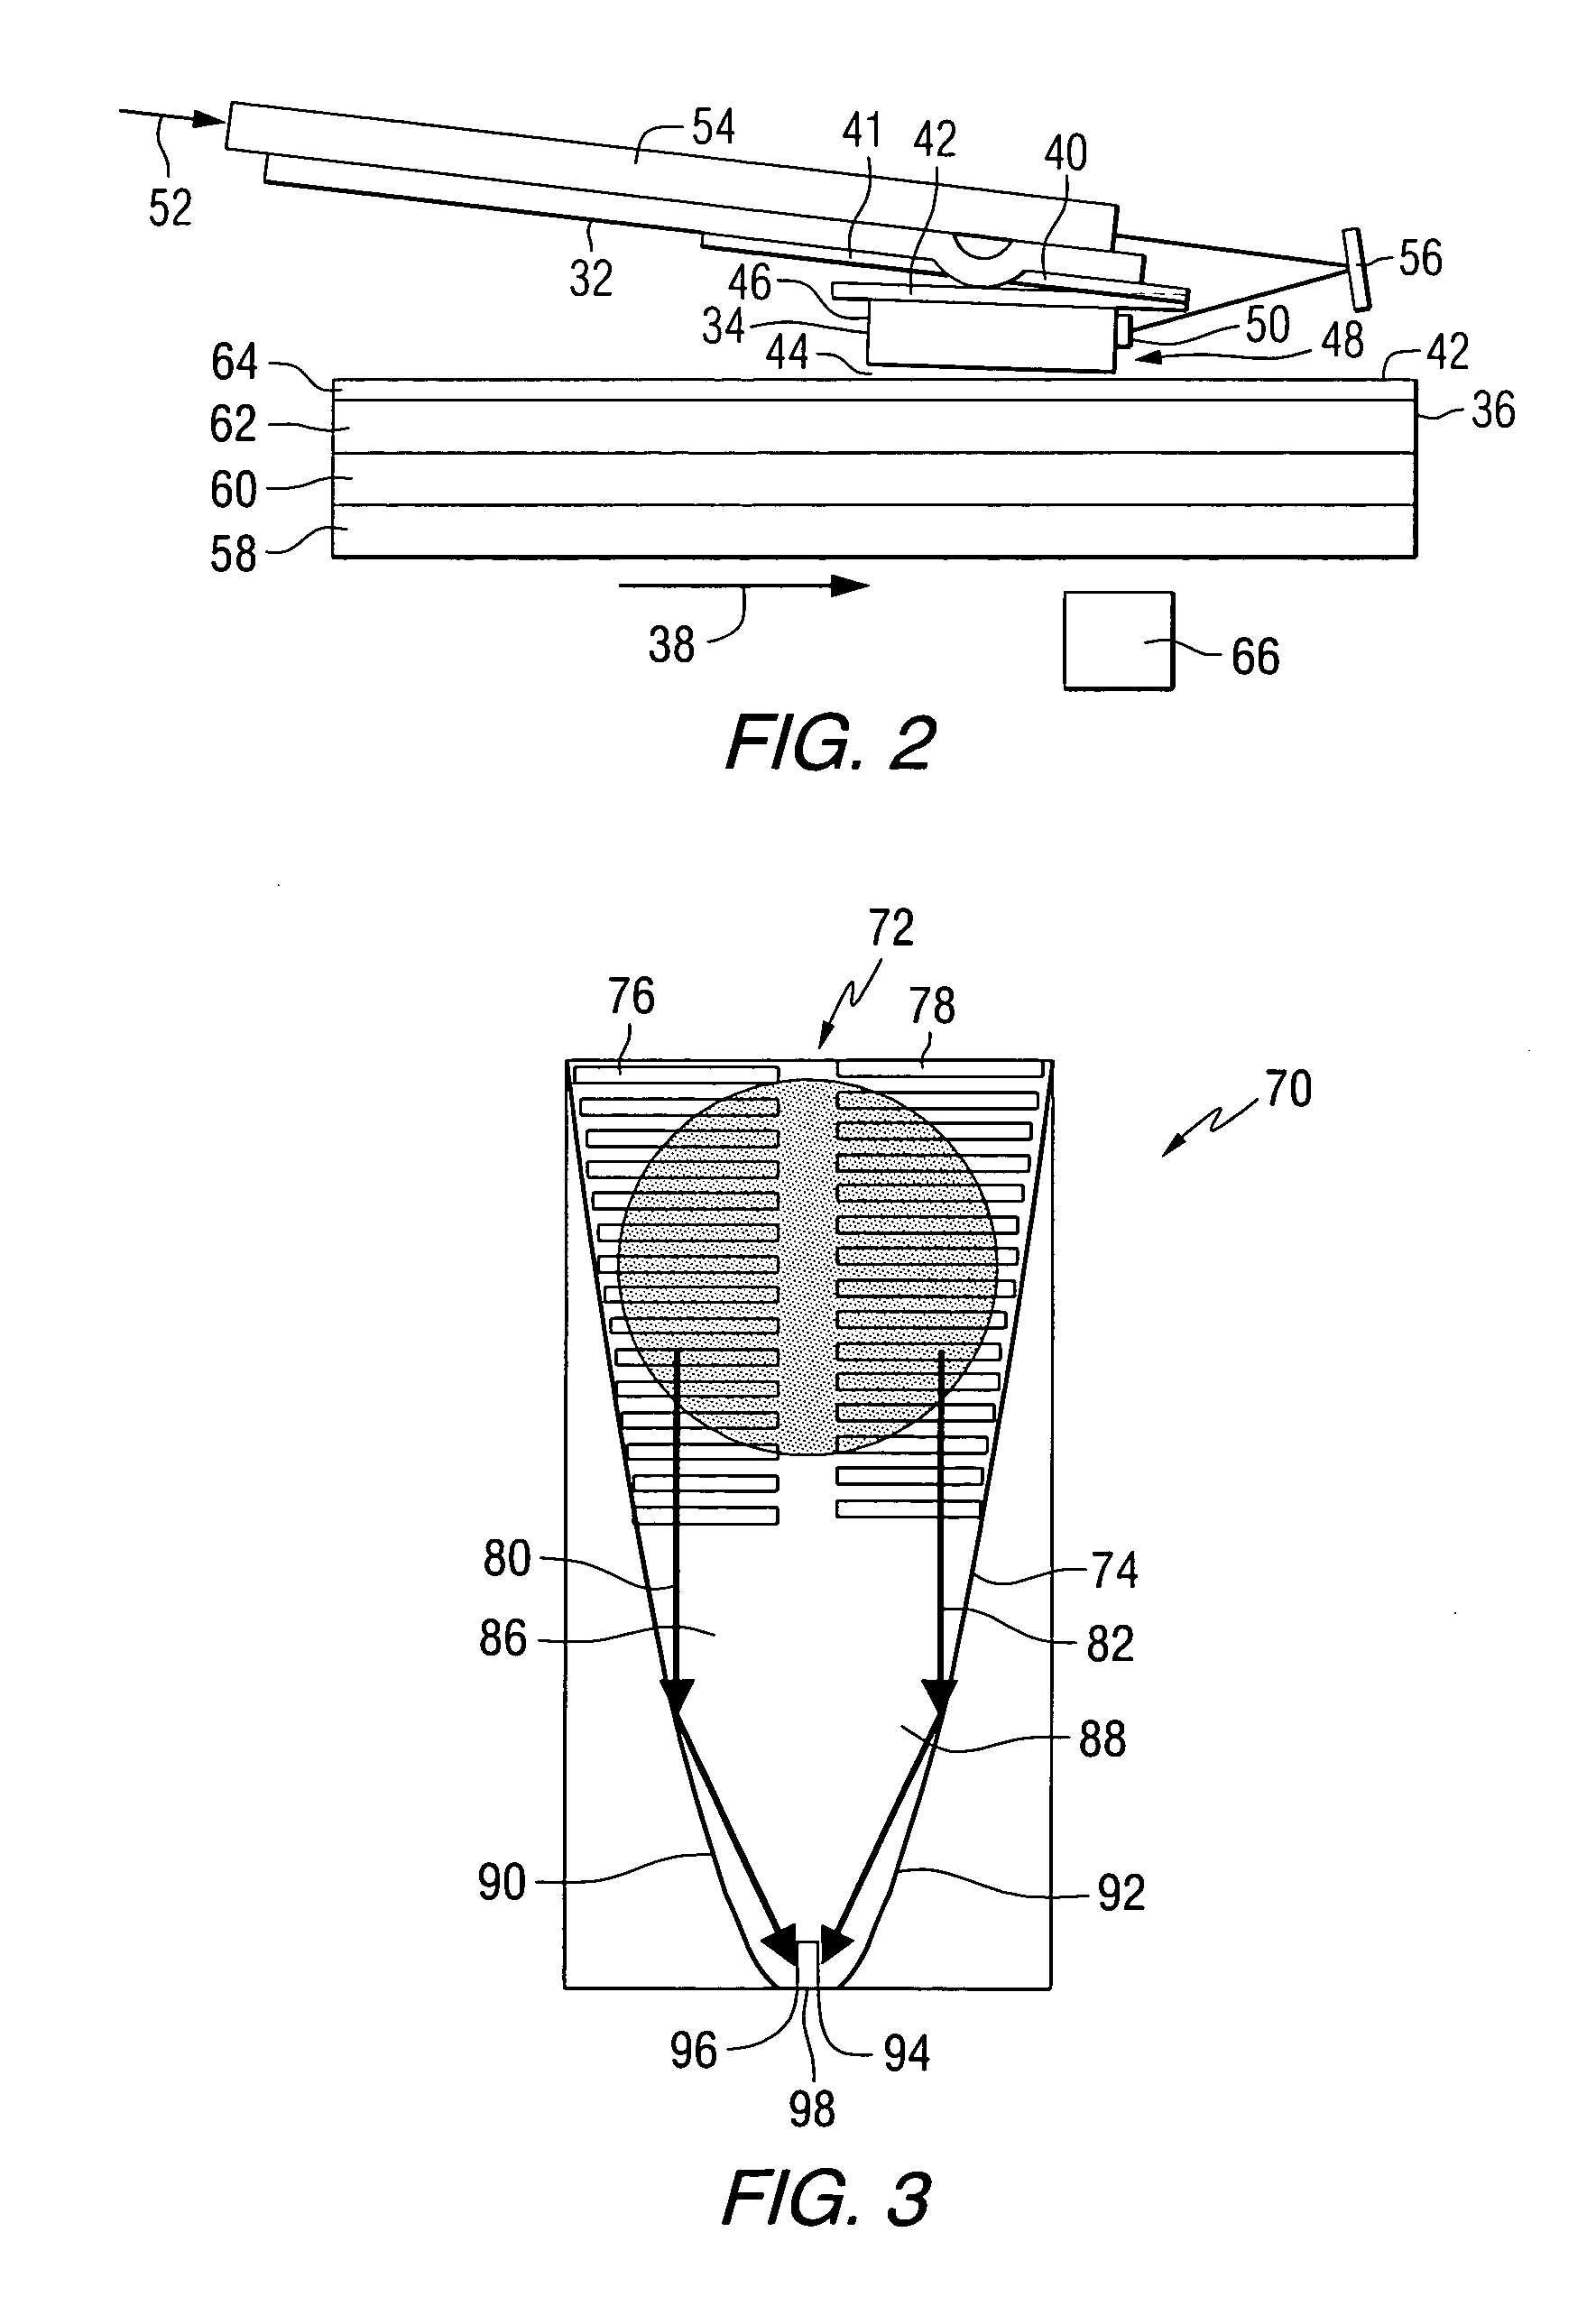 Optical recording using a waveguide structure and a phase change medium